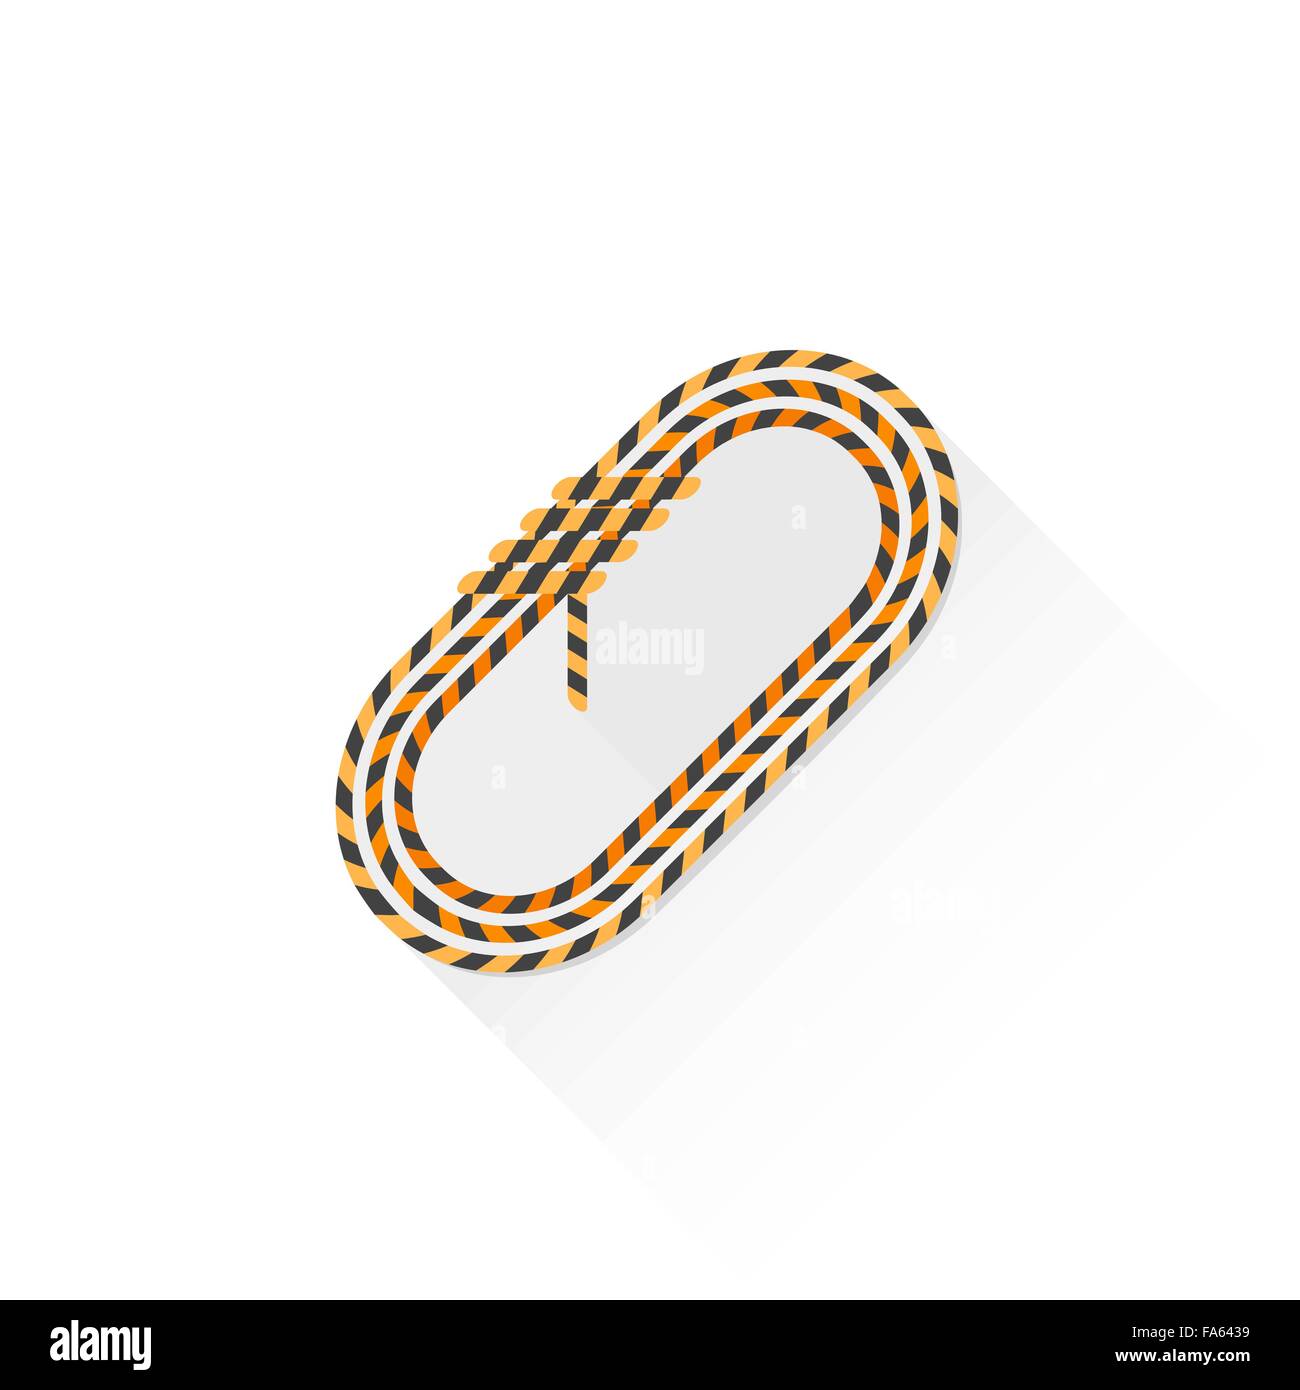 vector orange color climbing coil of rope flat design colored isolated illustration on white background with shadow Stock Vector